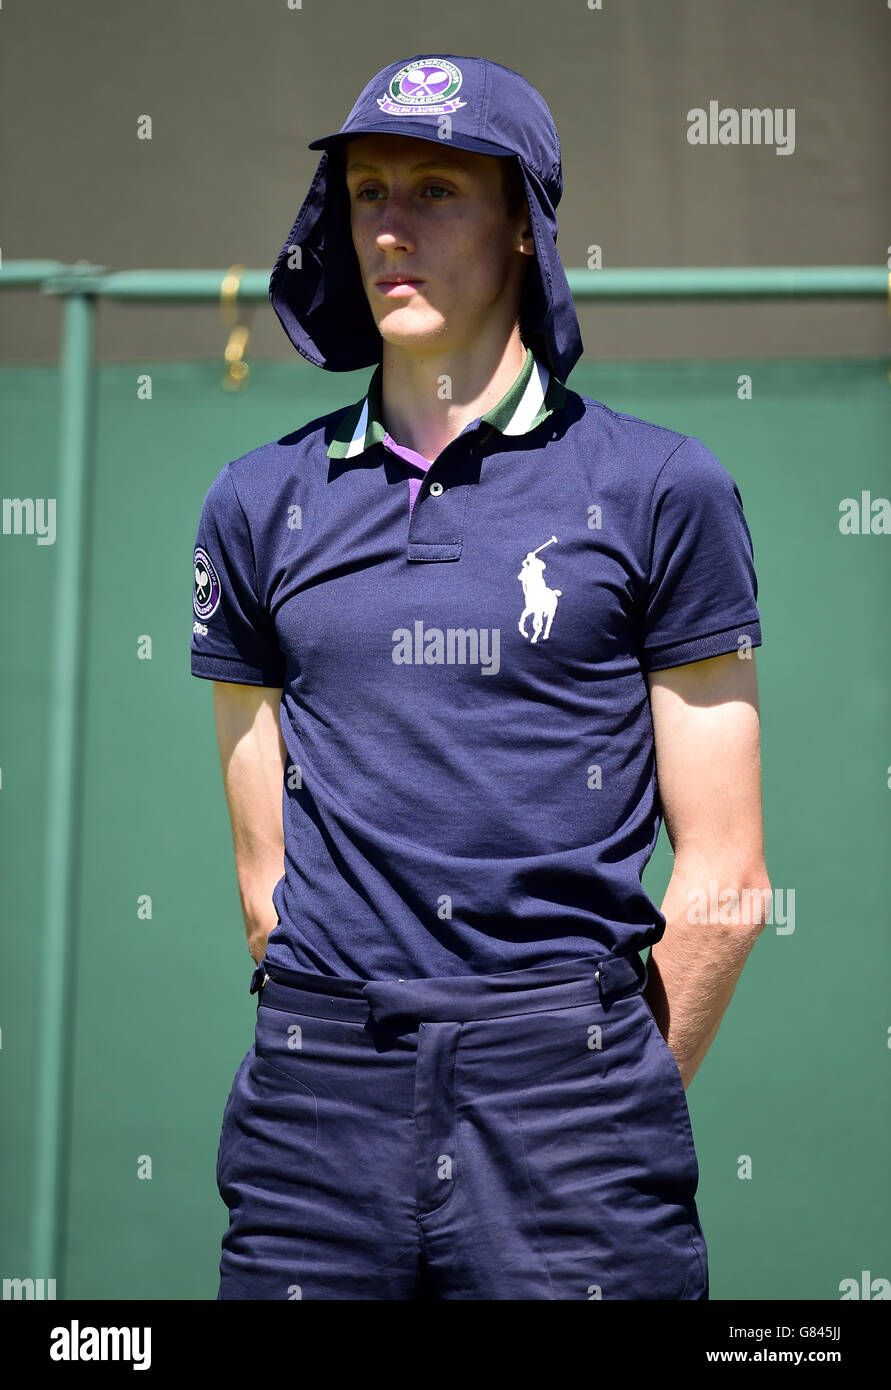 A boy wearing a larger cap to protect from the sun during day two of the Wimbledon Championships at the All England Lawn Tennis and Croquet Club, Wimbledon Stock Photo -